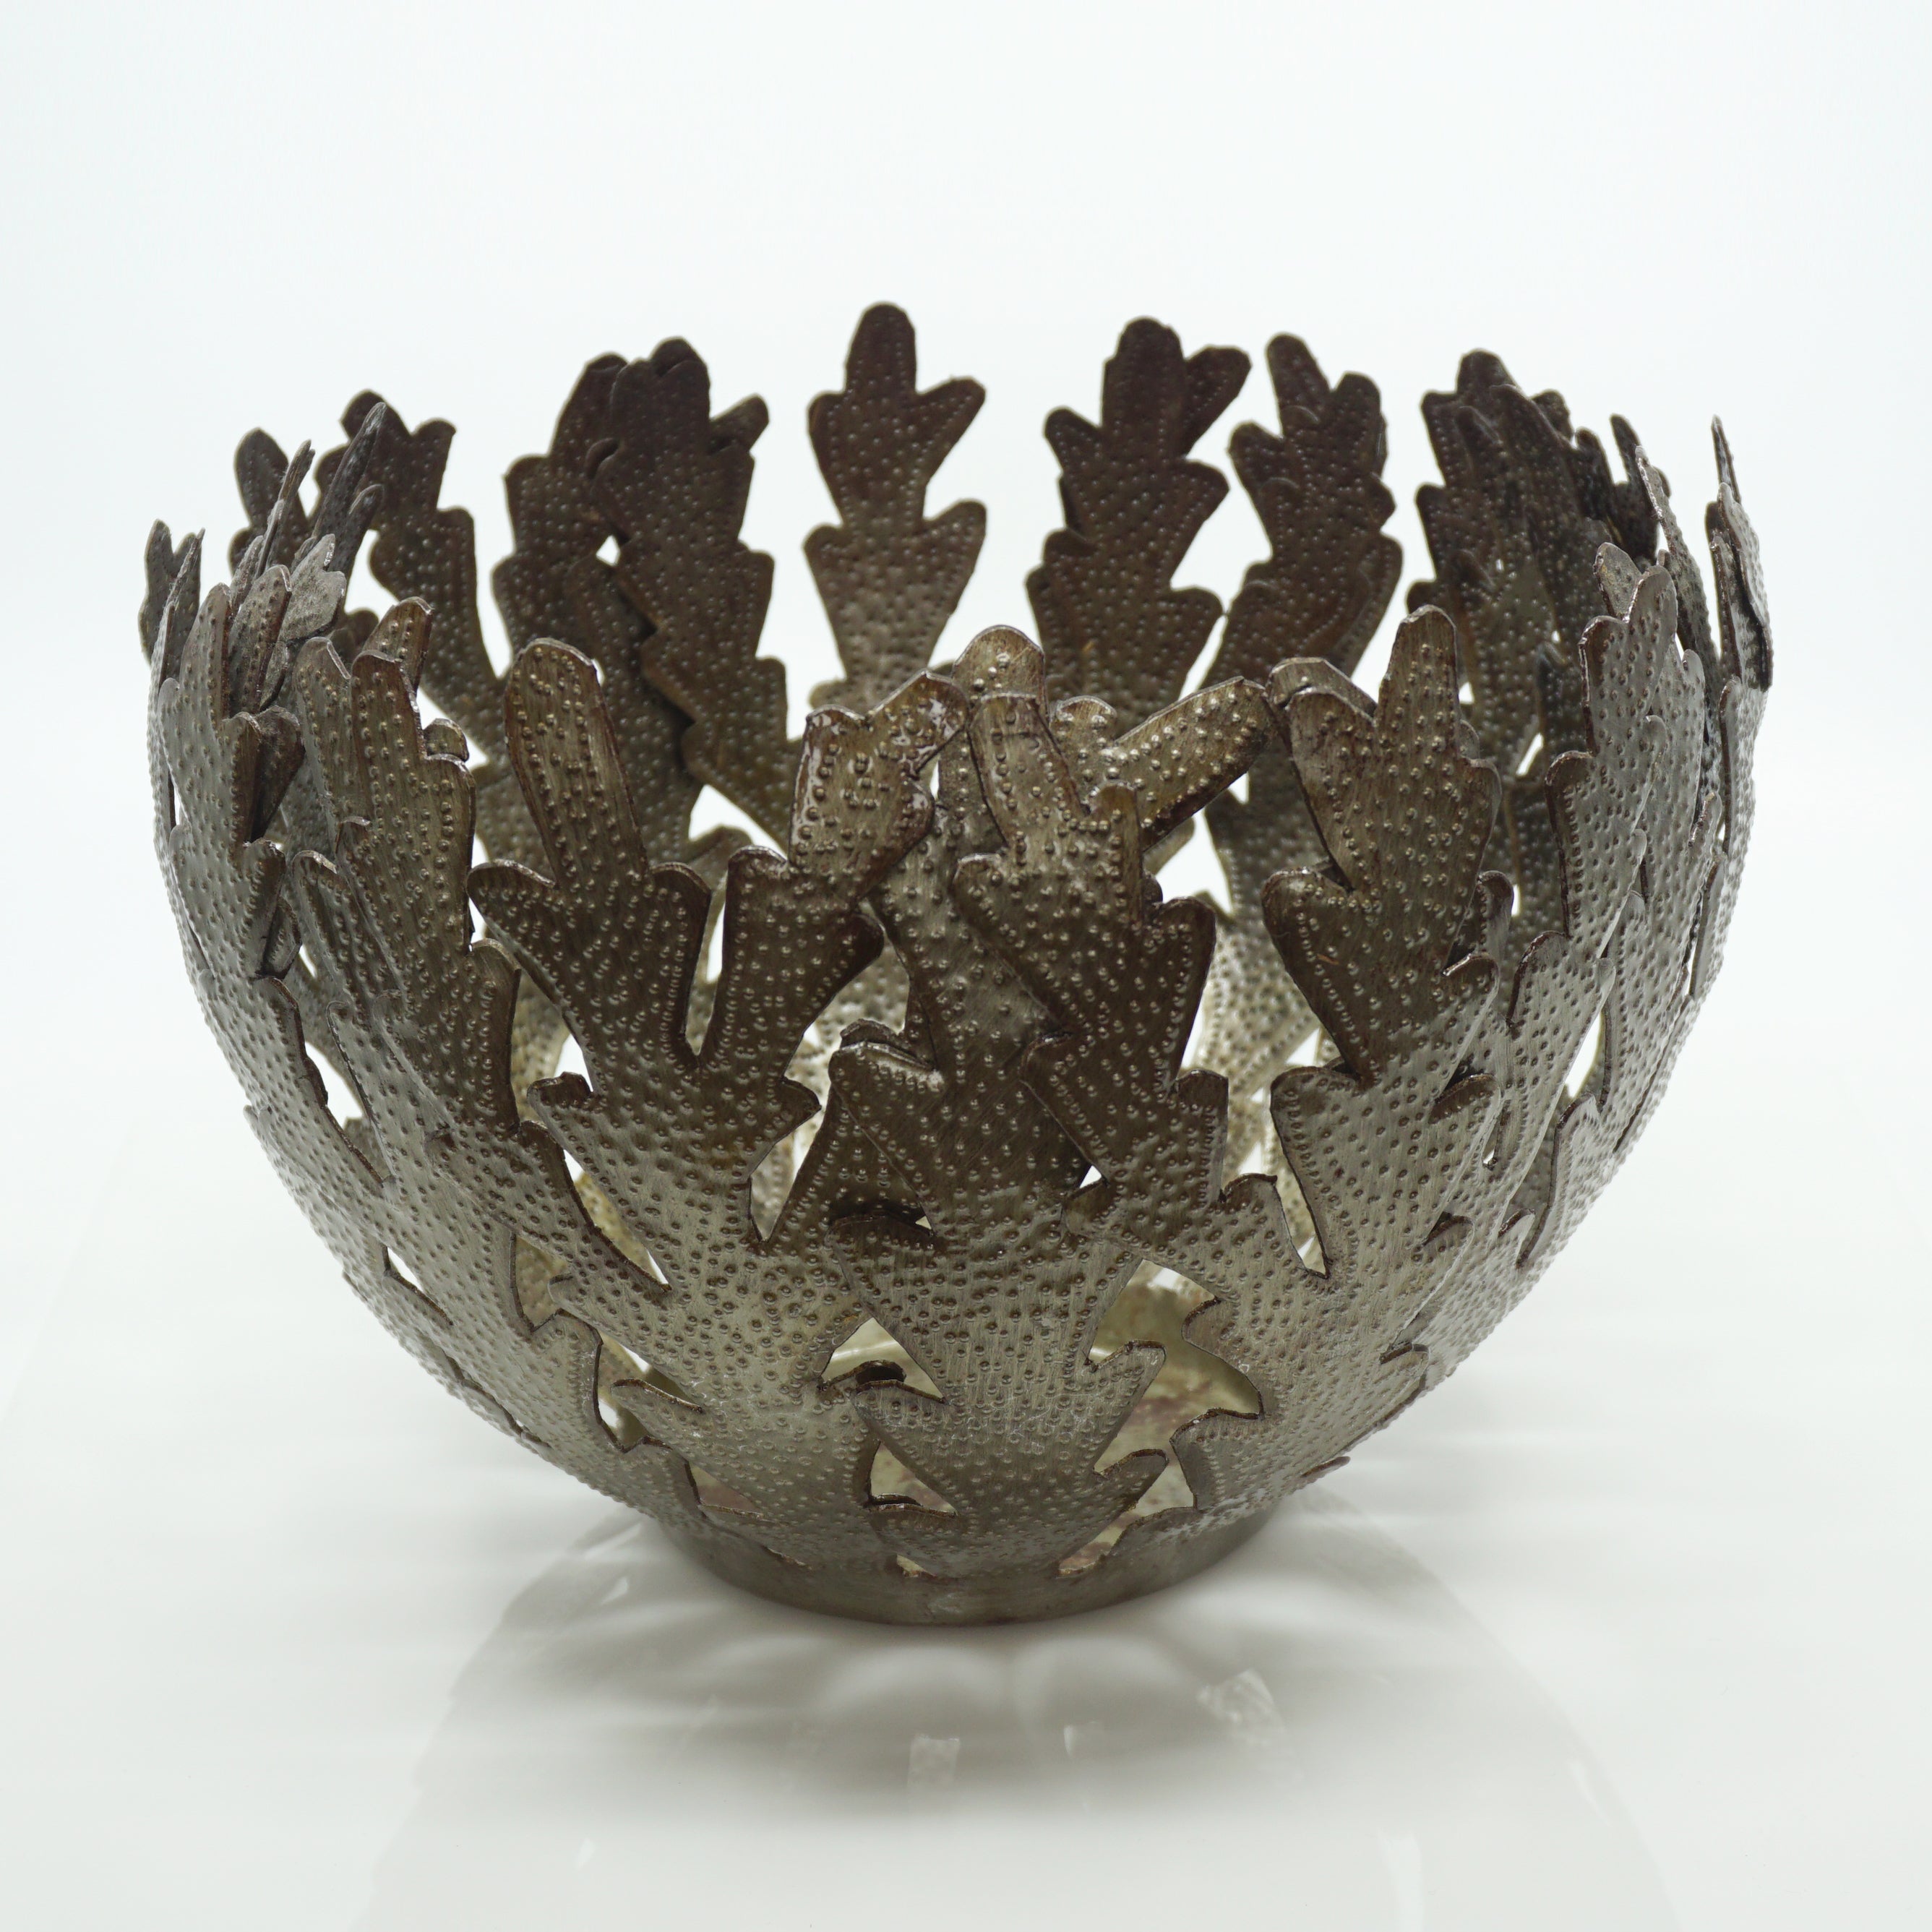 Signed Josnel Bruno Handmade, Hammered, Chiseled and Incised Coral Reef Bowl. Made in Haiti.